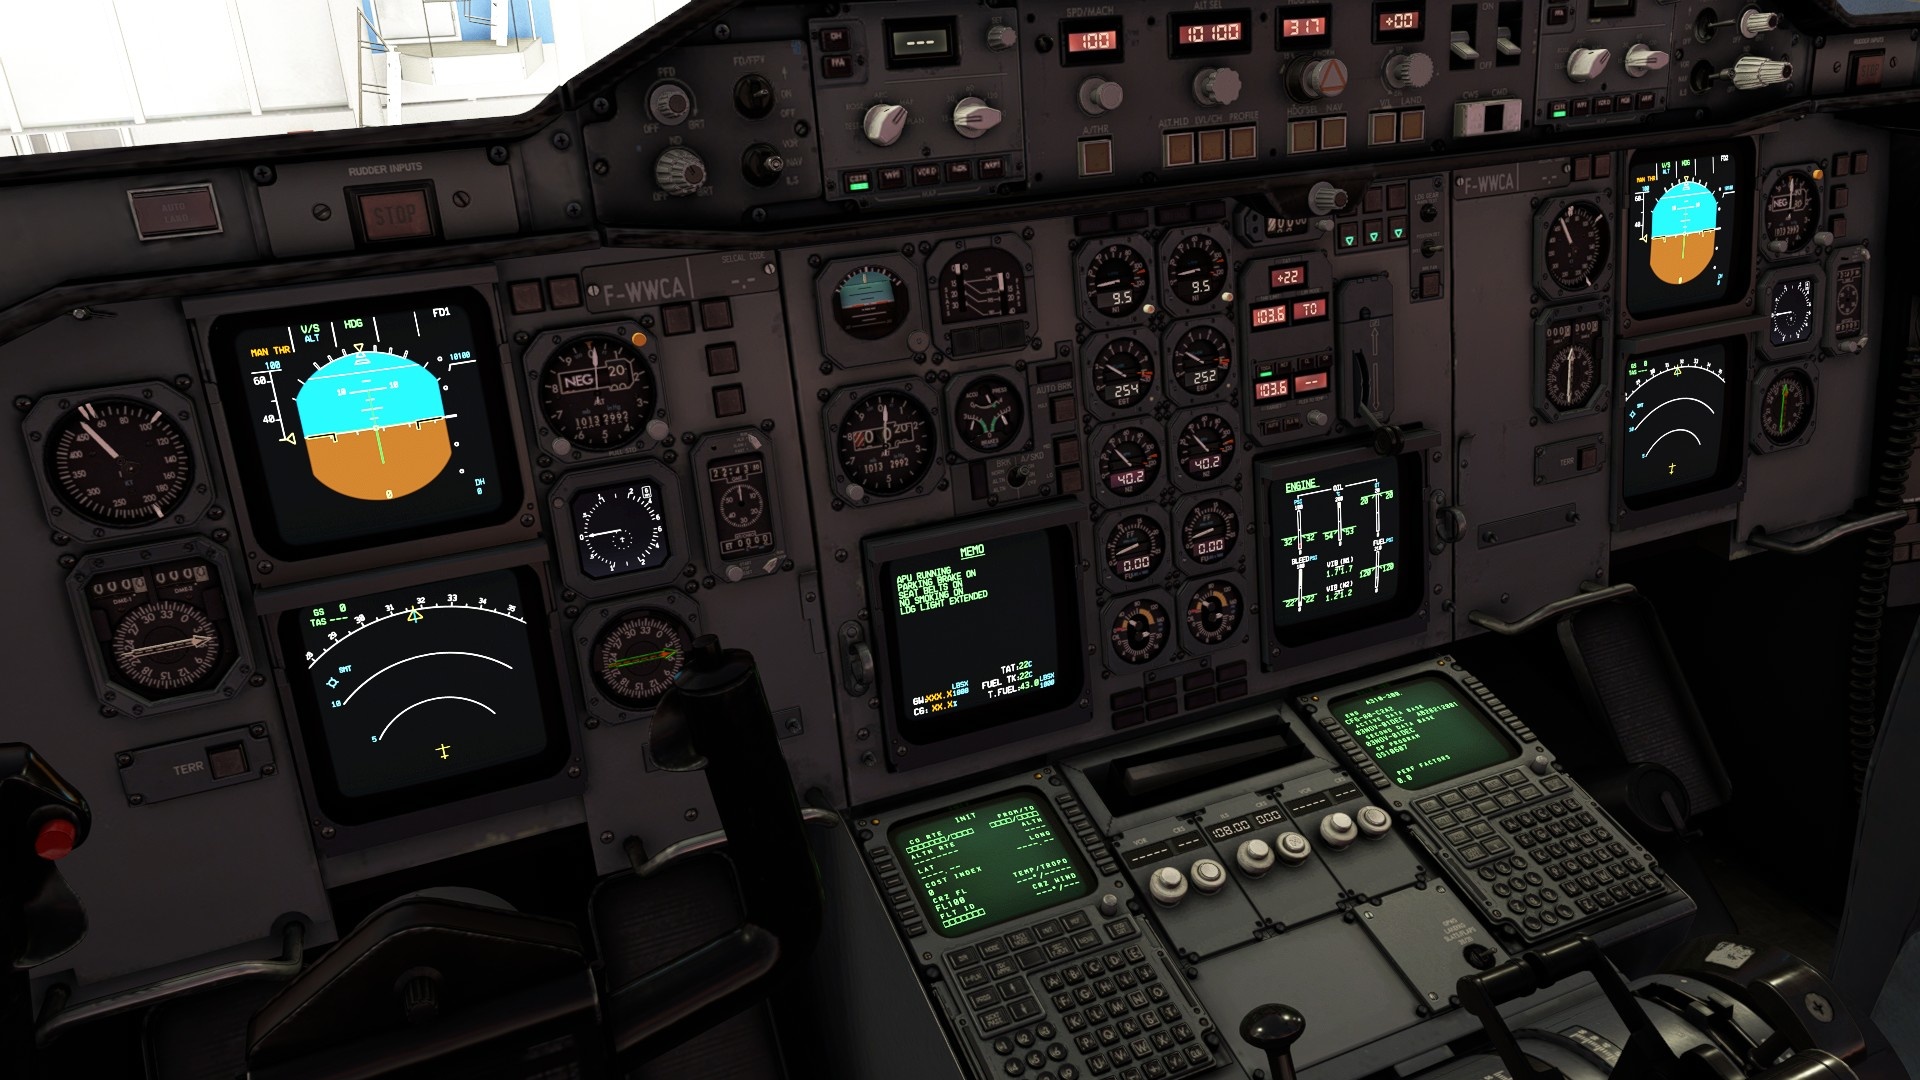 (The cockpit of the A310 exudes wonderful 1980s atmosphere and reminds more of an old Boeing 737 than of modern Airbus models).